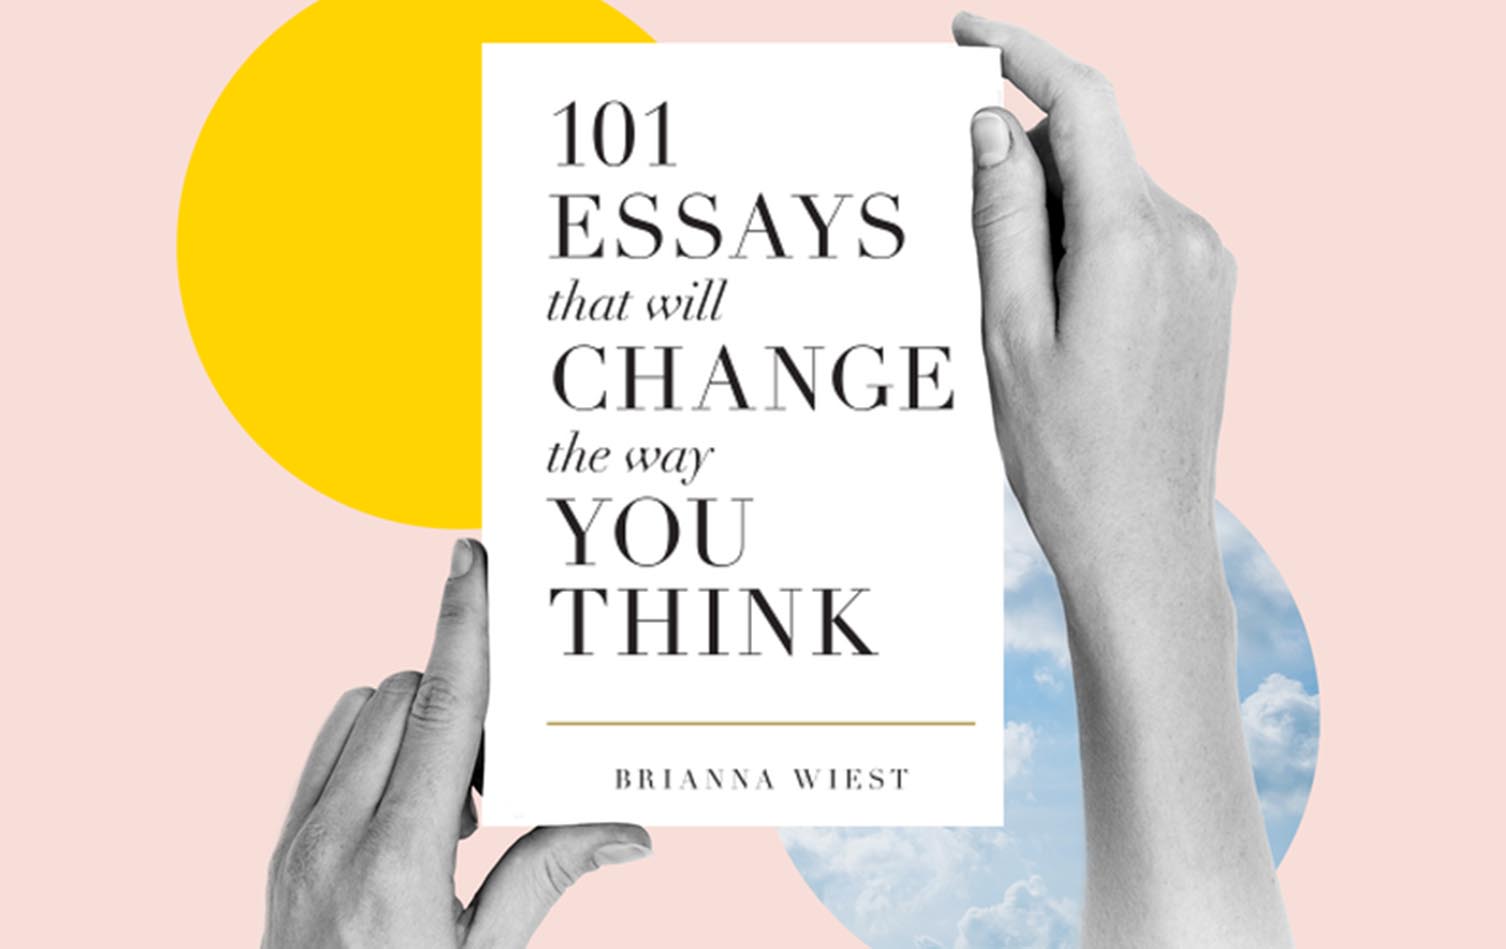 101 ESSAYS that will CHANGE the way YOU THINK: Free PDF Book